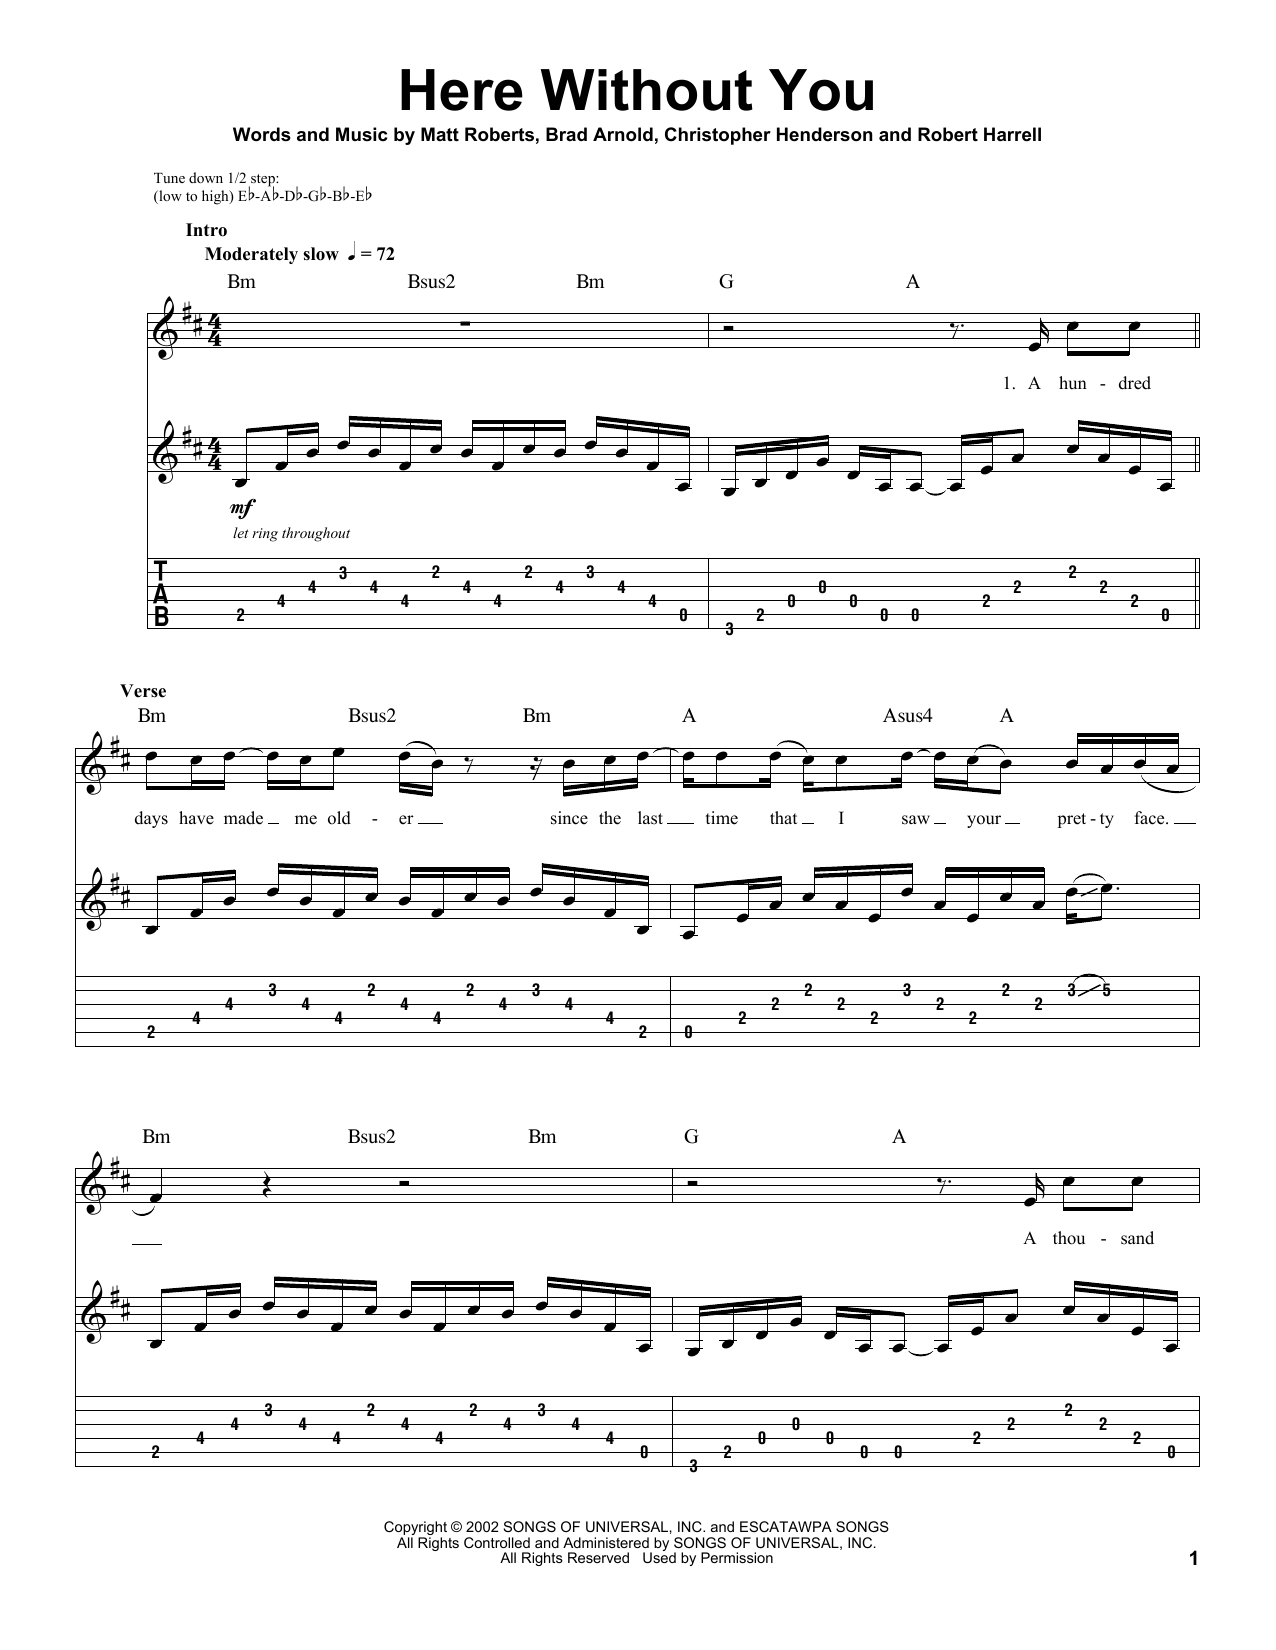 Download 3 Doors Down Here Without You Sheet Music